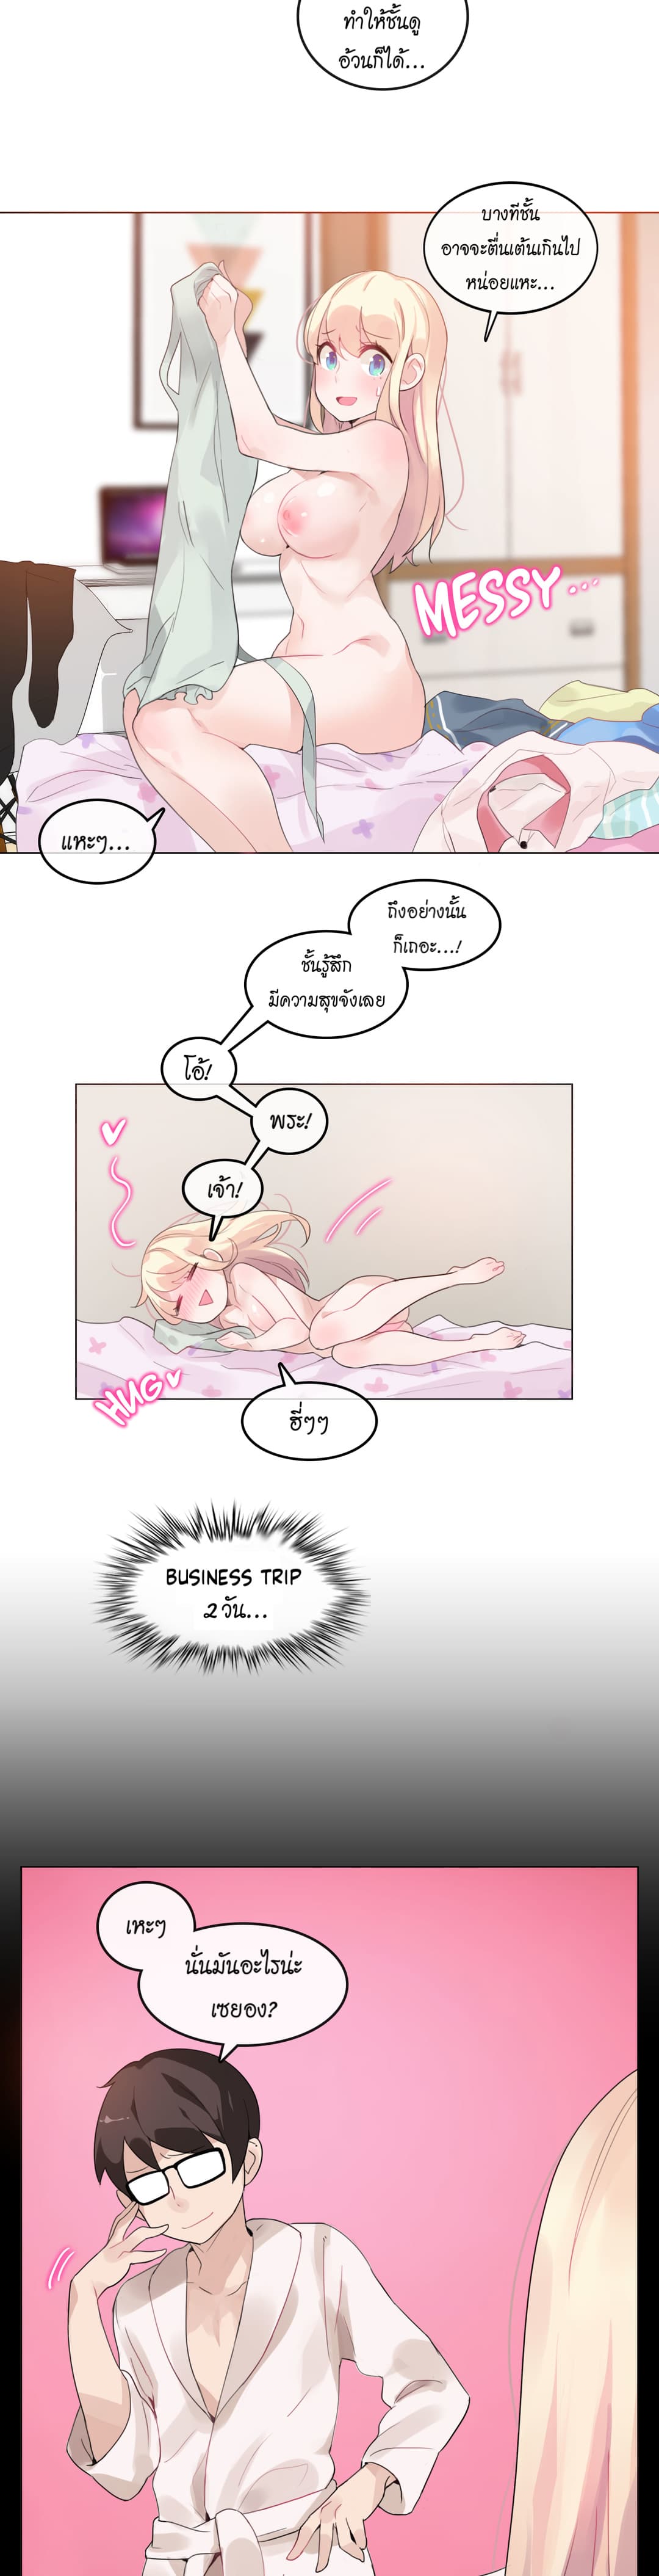 A Pervert’s Daily Life 18 (17)